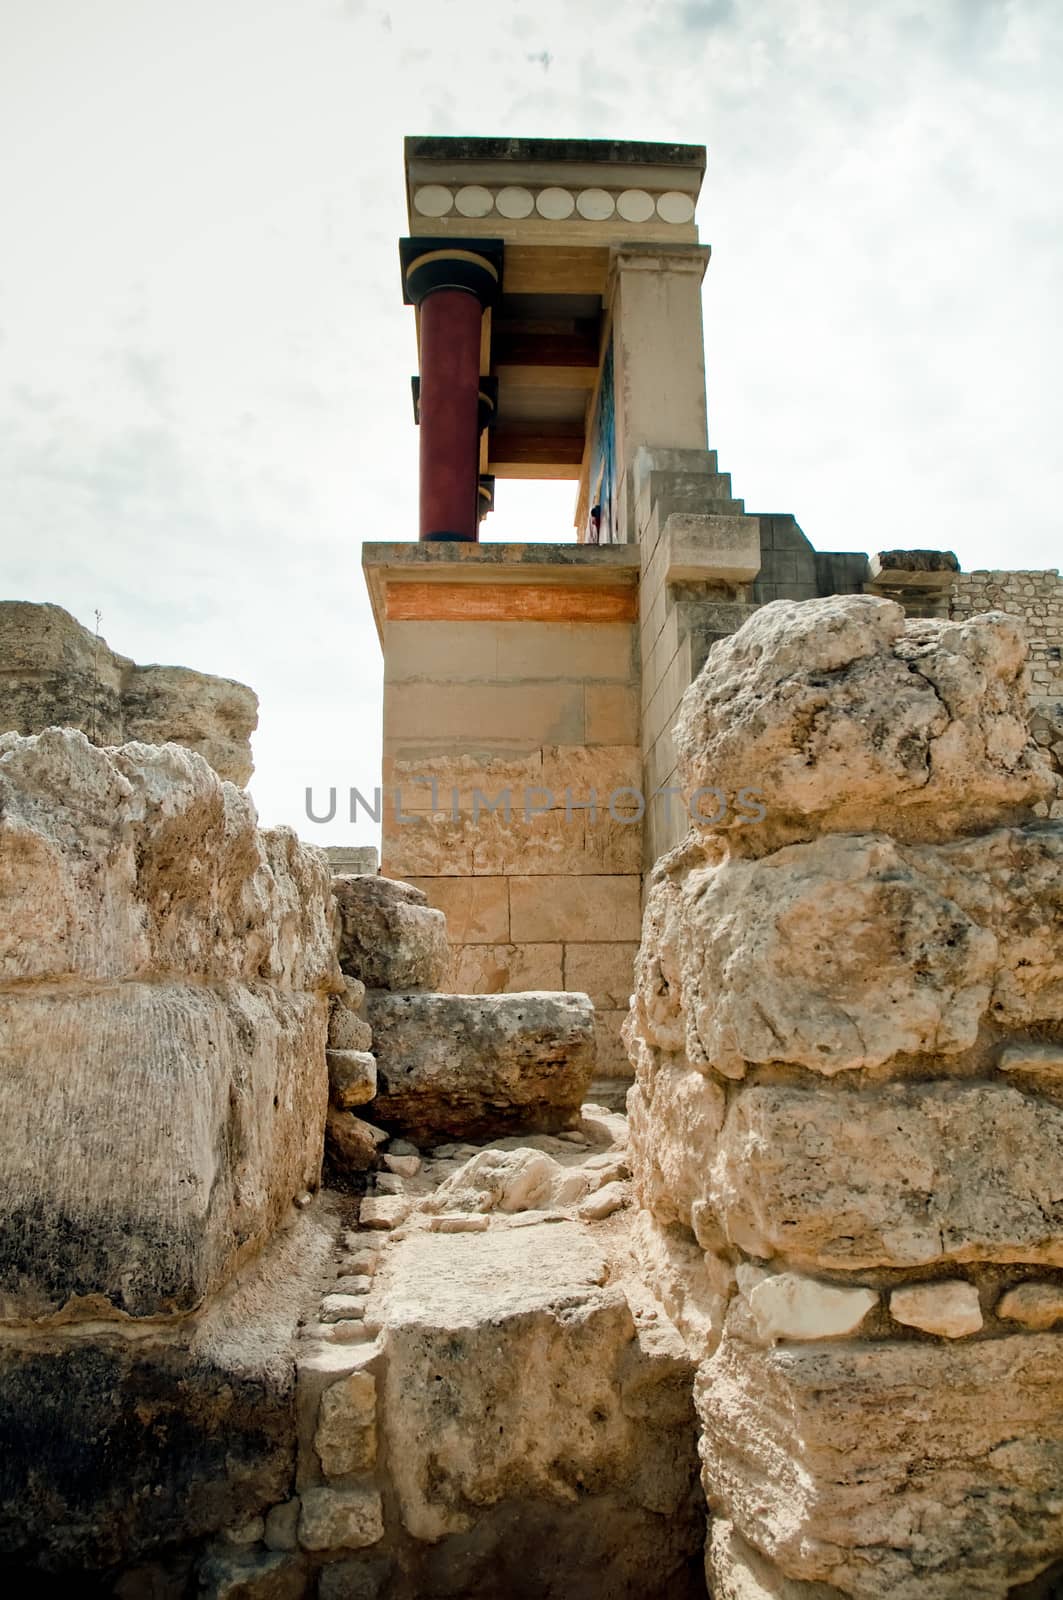 Knossos, also known as Labyrinth, or Knossos Palace, is the largest Bronze Age archaeological site on Crete.